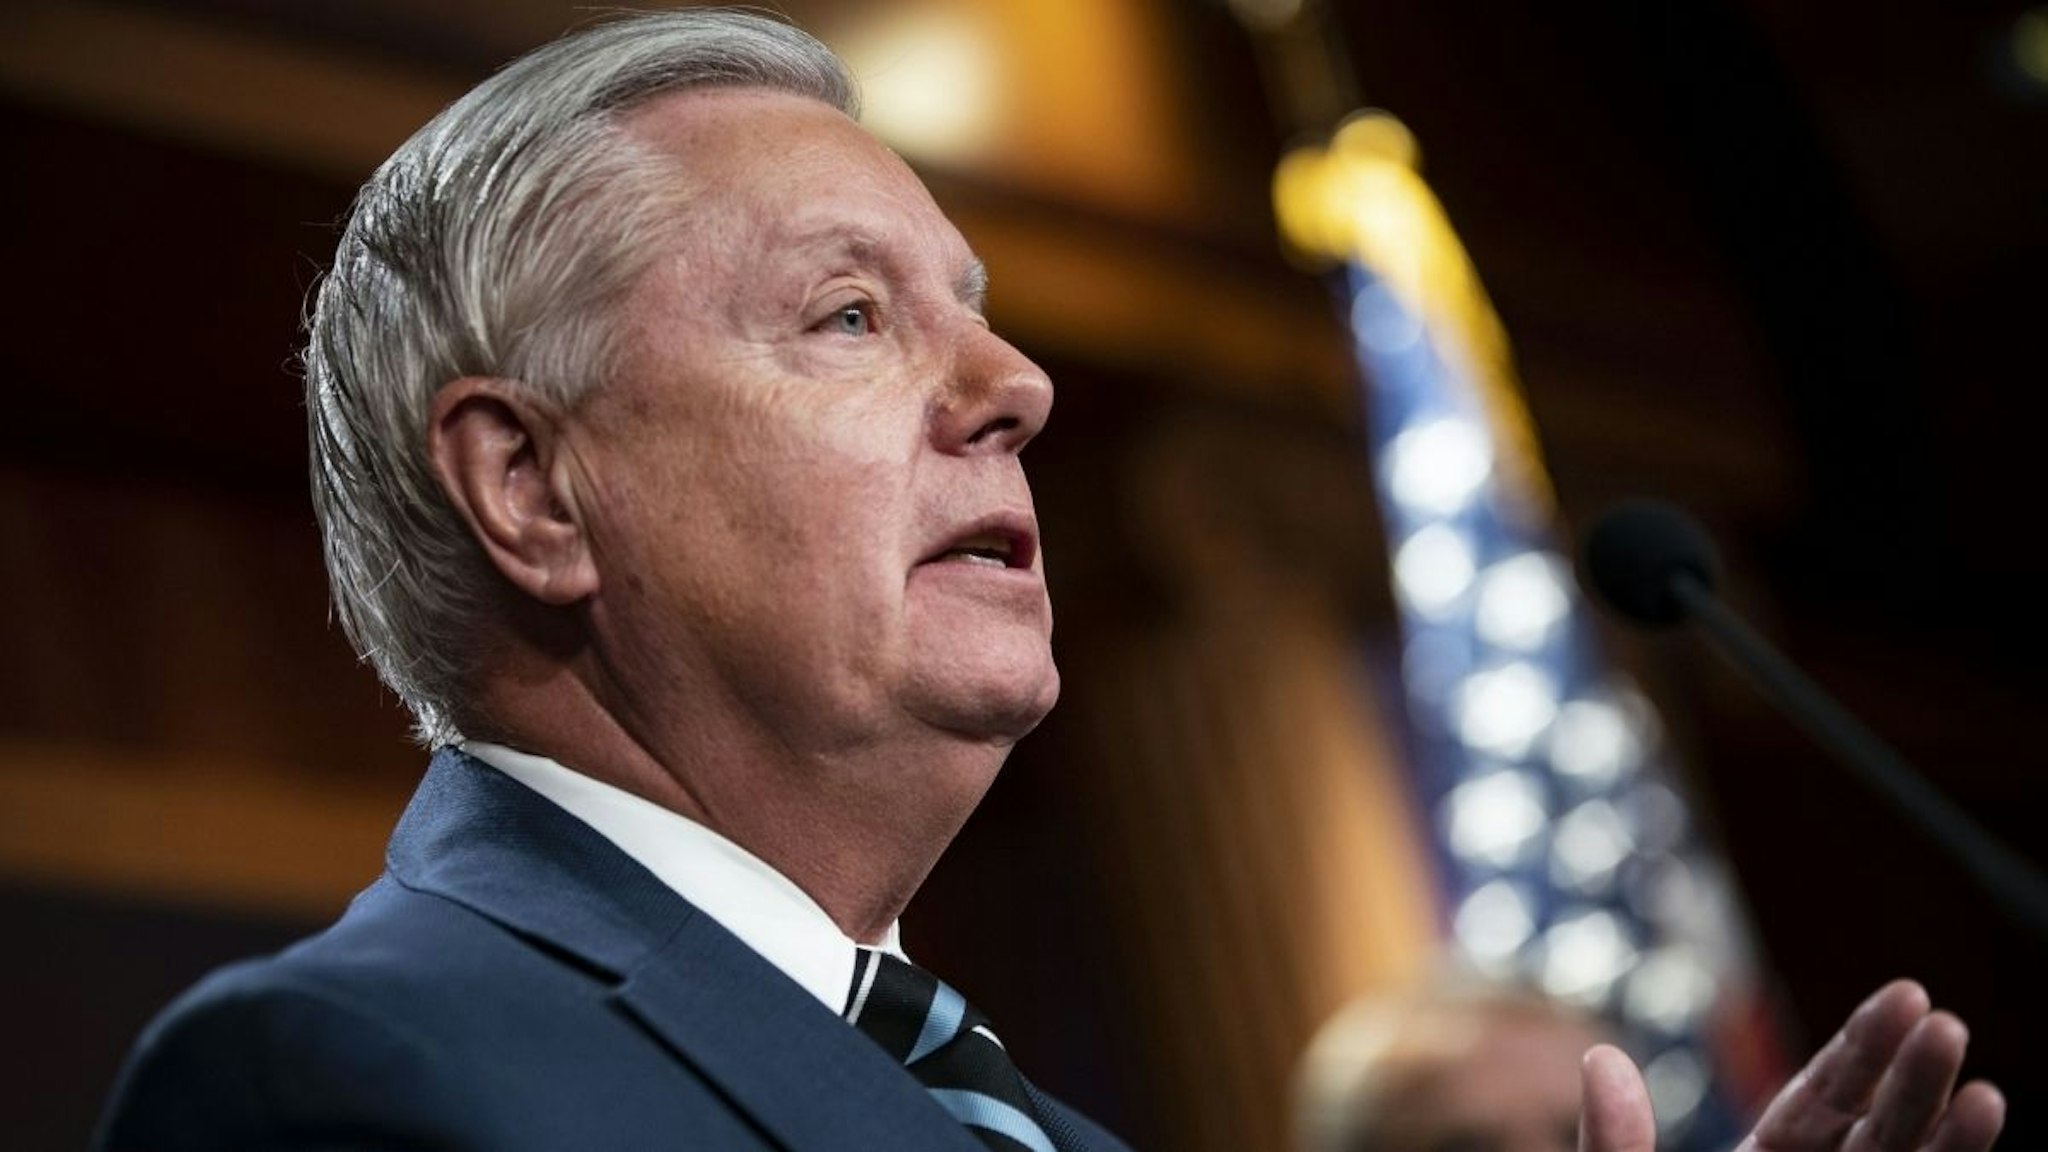 Senator Lindsey Graham, a Republican from South Carolina, speaks about the Russian invasion of Ukraine during a news conference at the U.S. Capitol in Washington, D.C., U.S., on Wednesday, March 2, 2022.